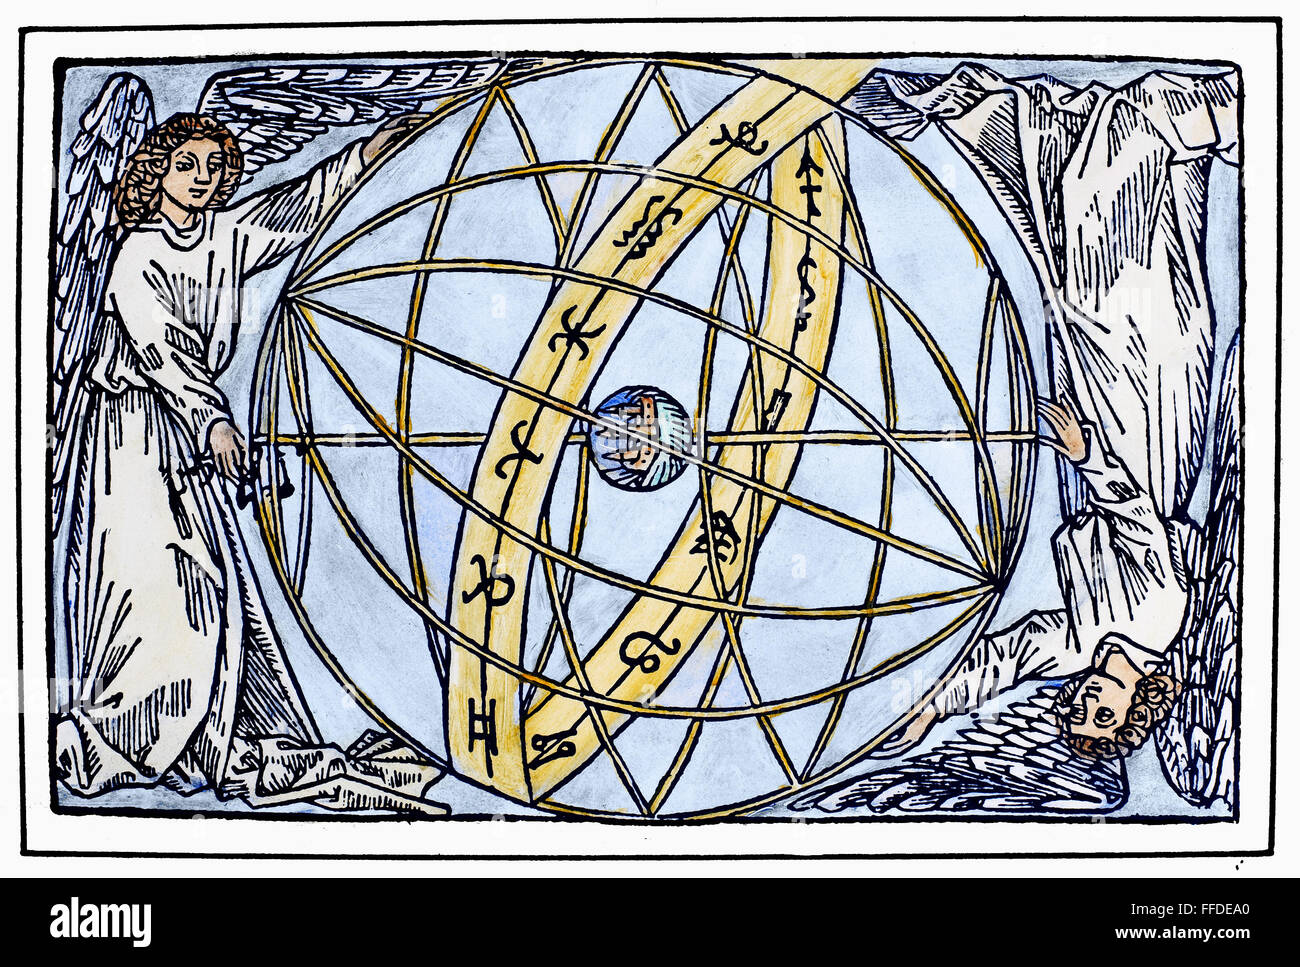 ARMILLARY SPHERE, 1509. /nTwo antipodal angels holding an armillary sphere with the zodiac. Woodcut from an edition of Johannes de Sacrobosco's 'Textus spere materialis,' Leipzig, Germany, 1509. Stock Photo